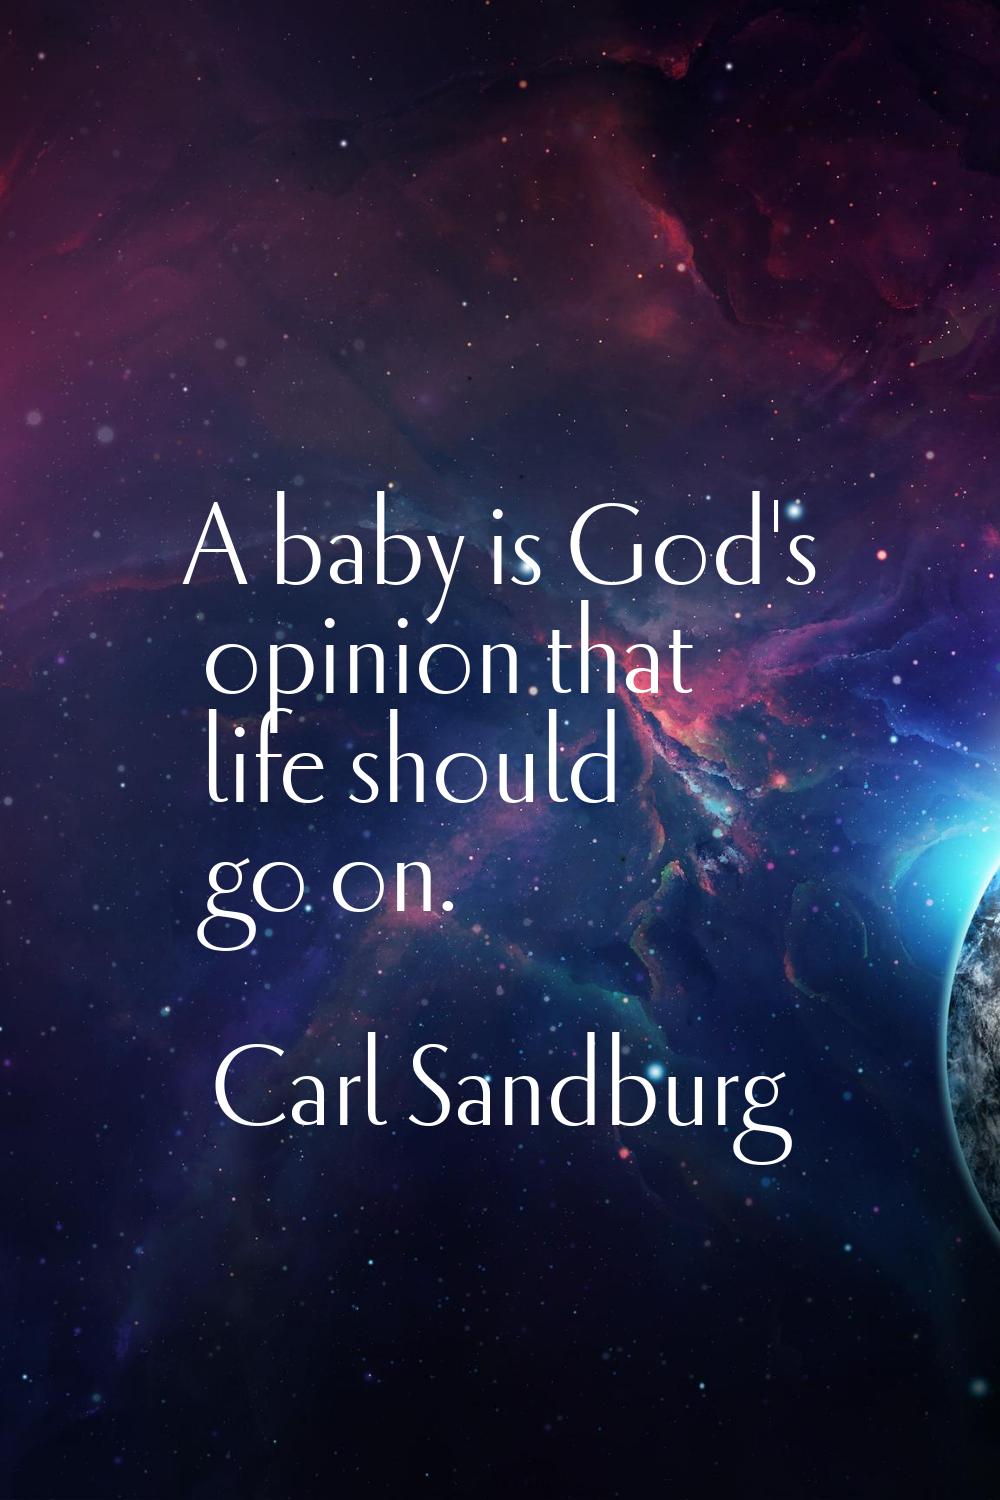 A baby is God's opinion that life should go on.